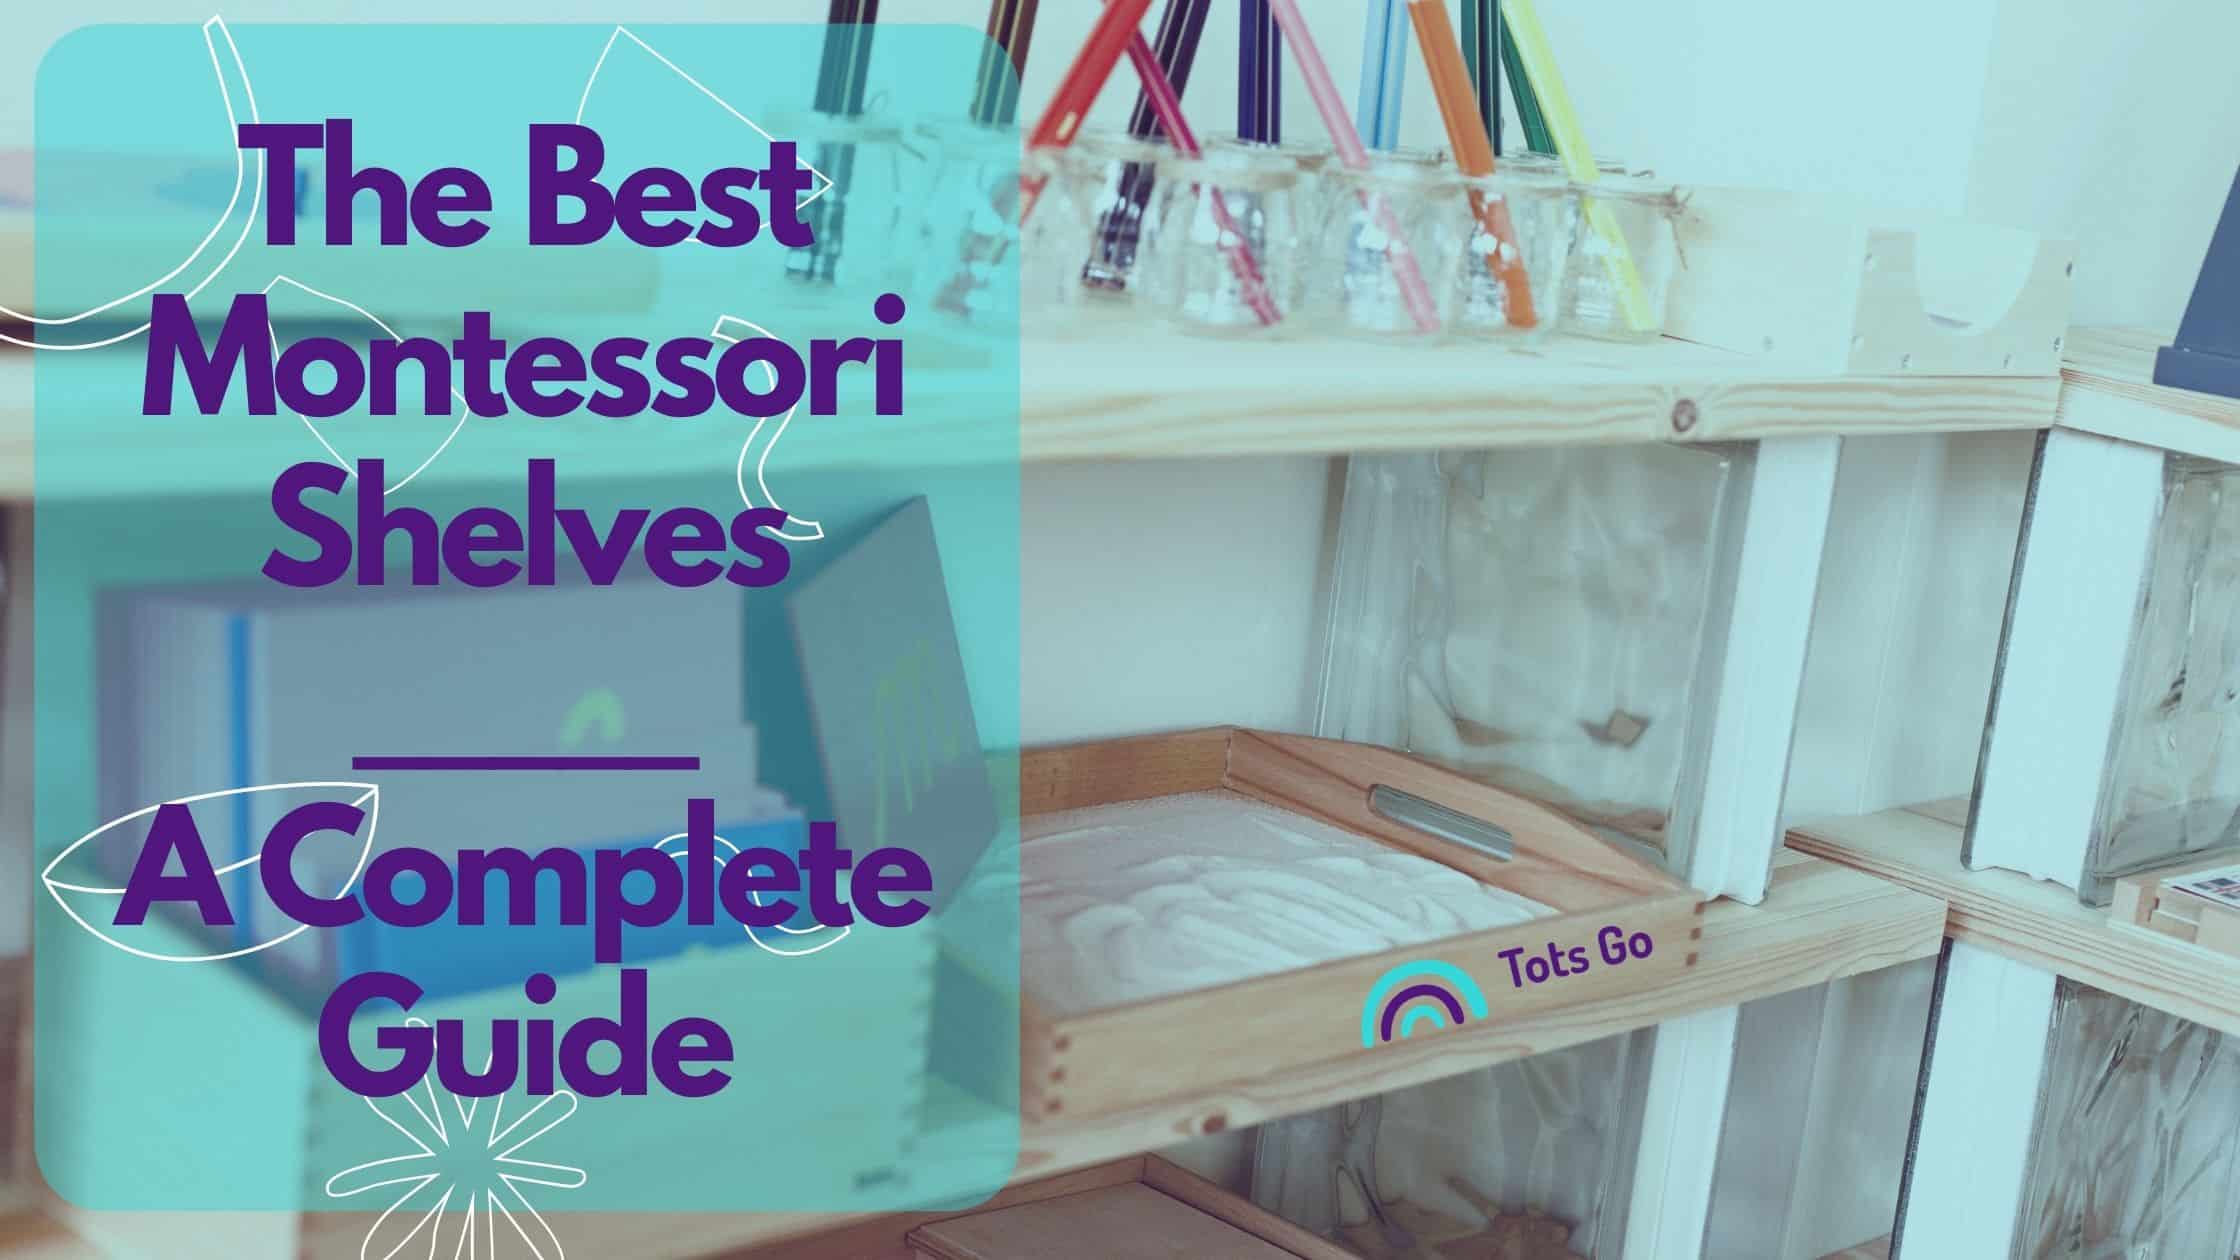 a complete guide to the best montessori shelves